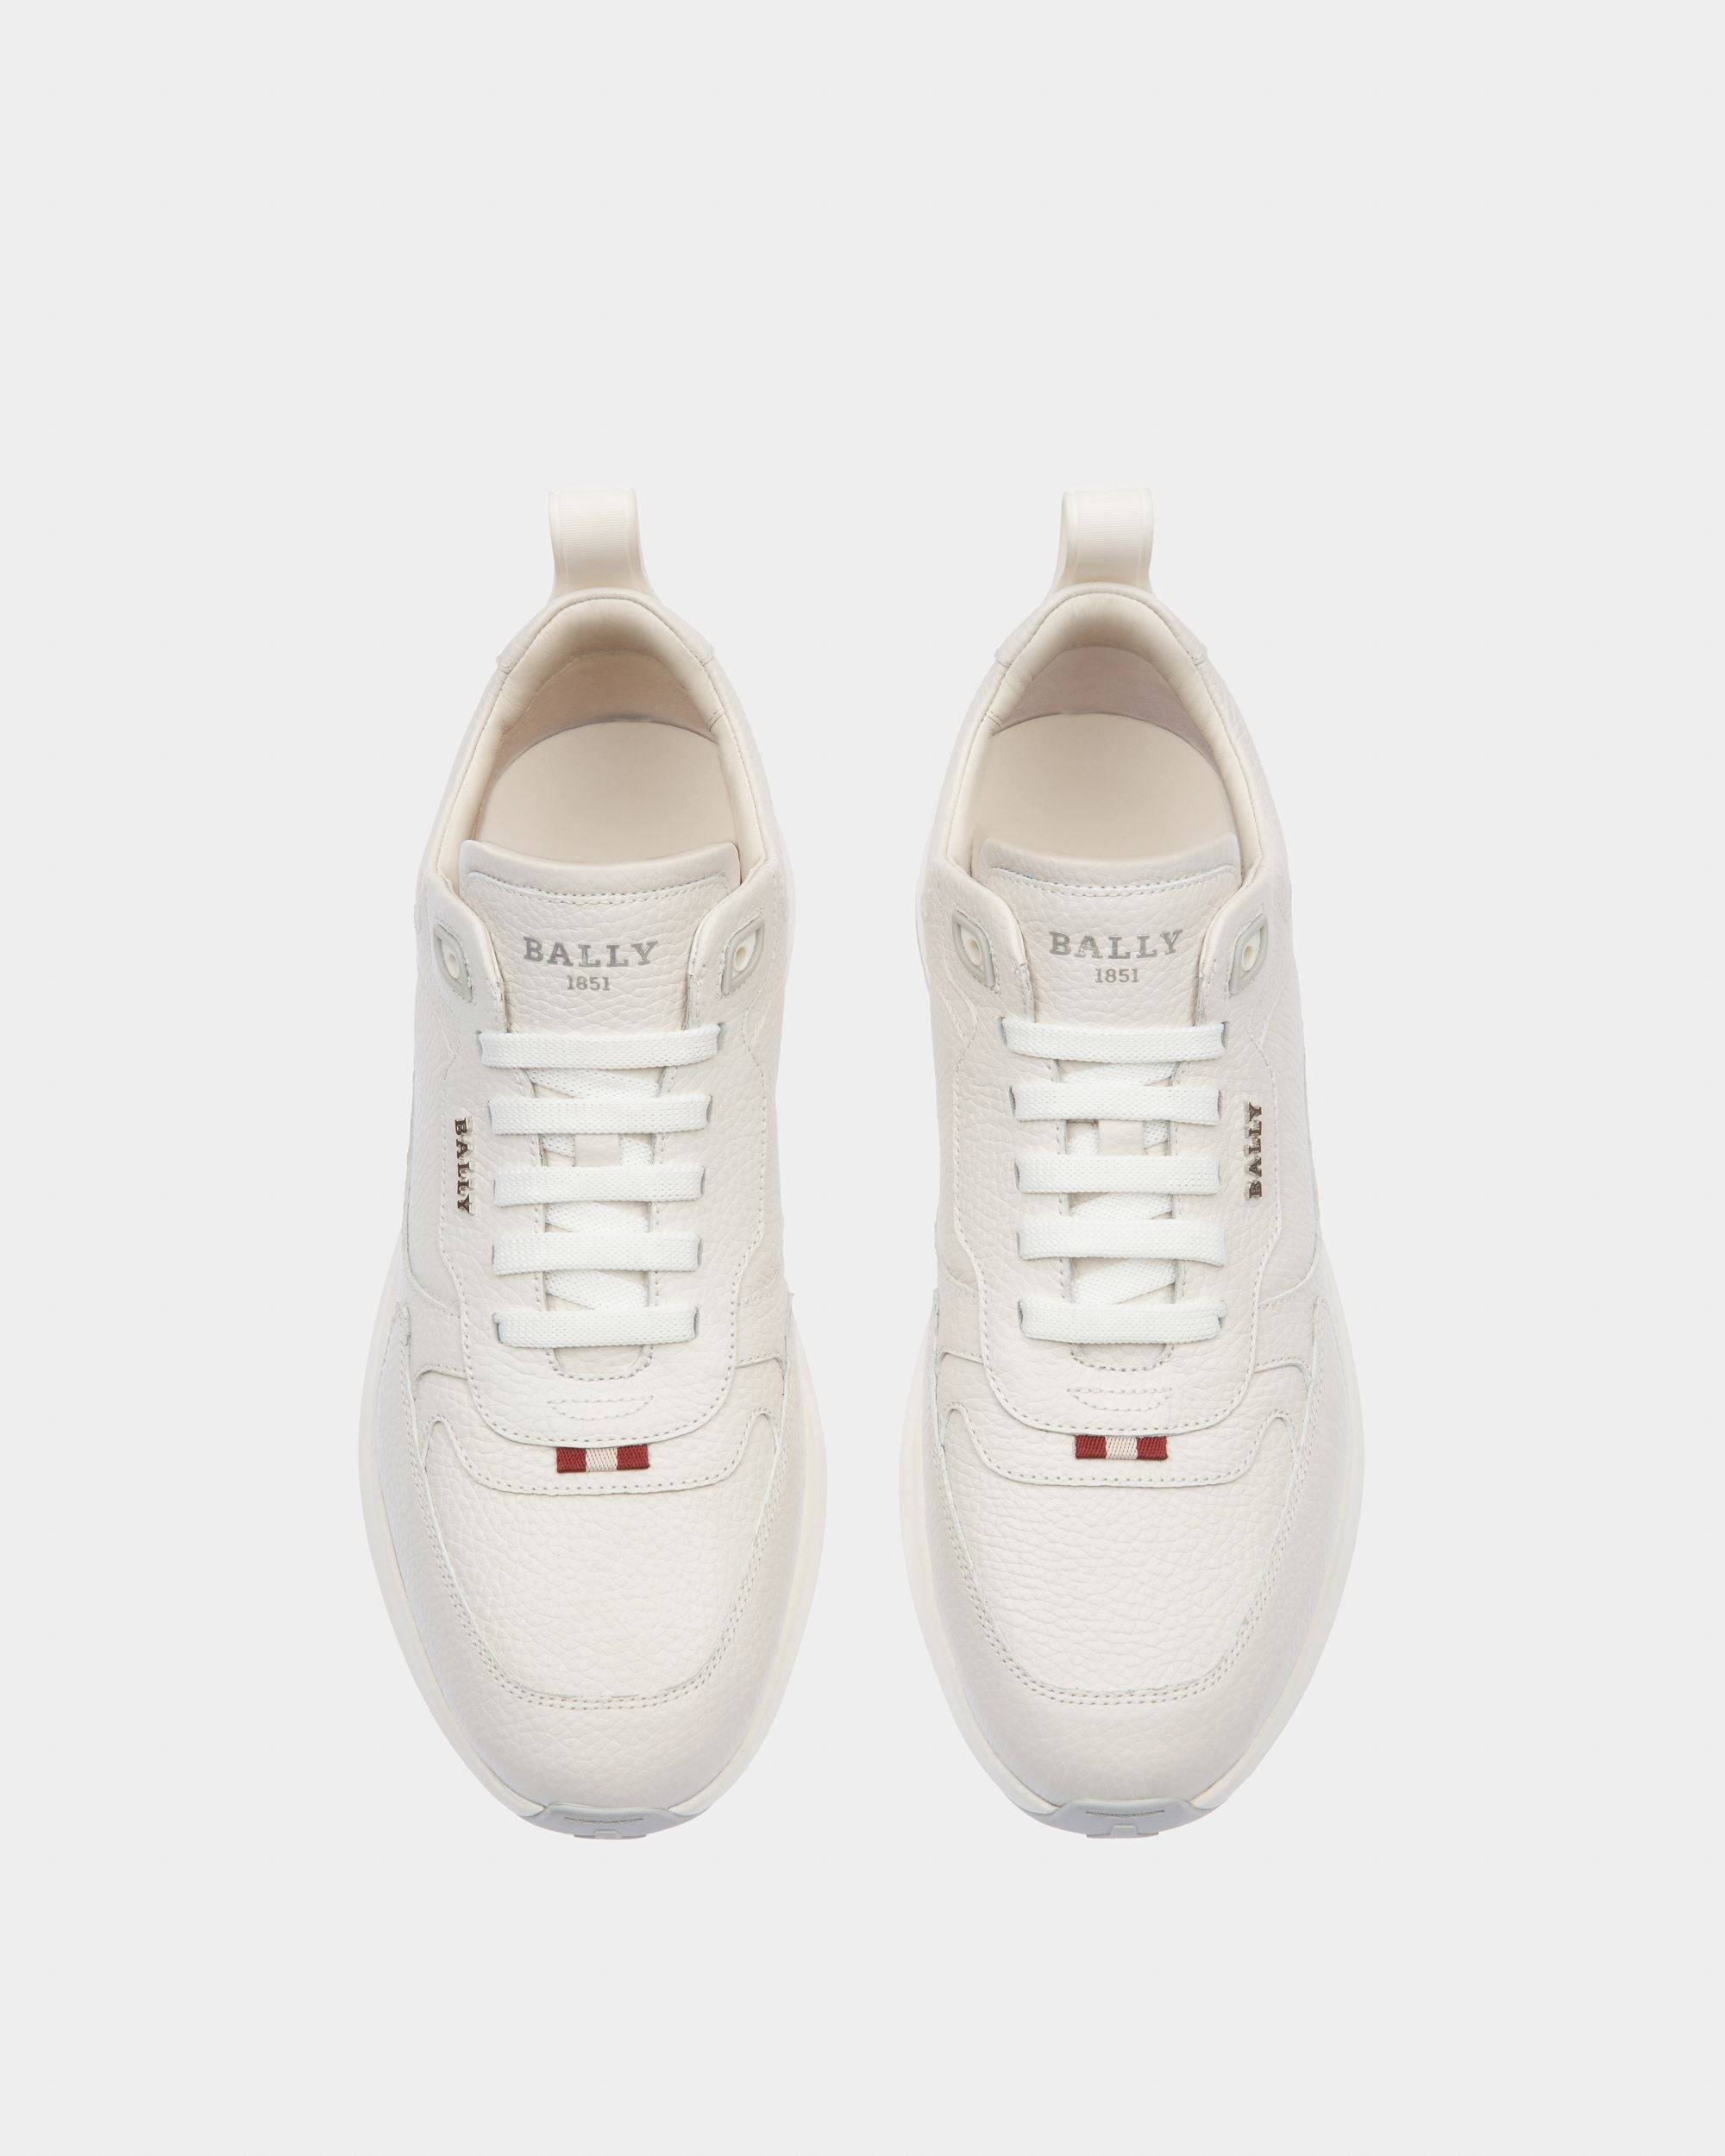 Dave Leather Sneakers In White - Men's - Bally - 03